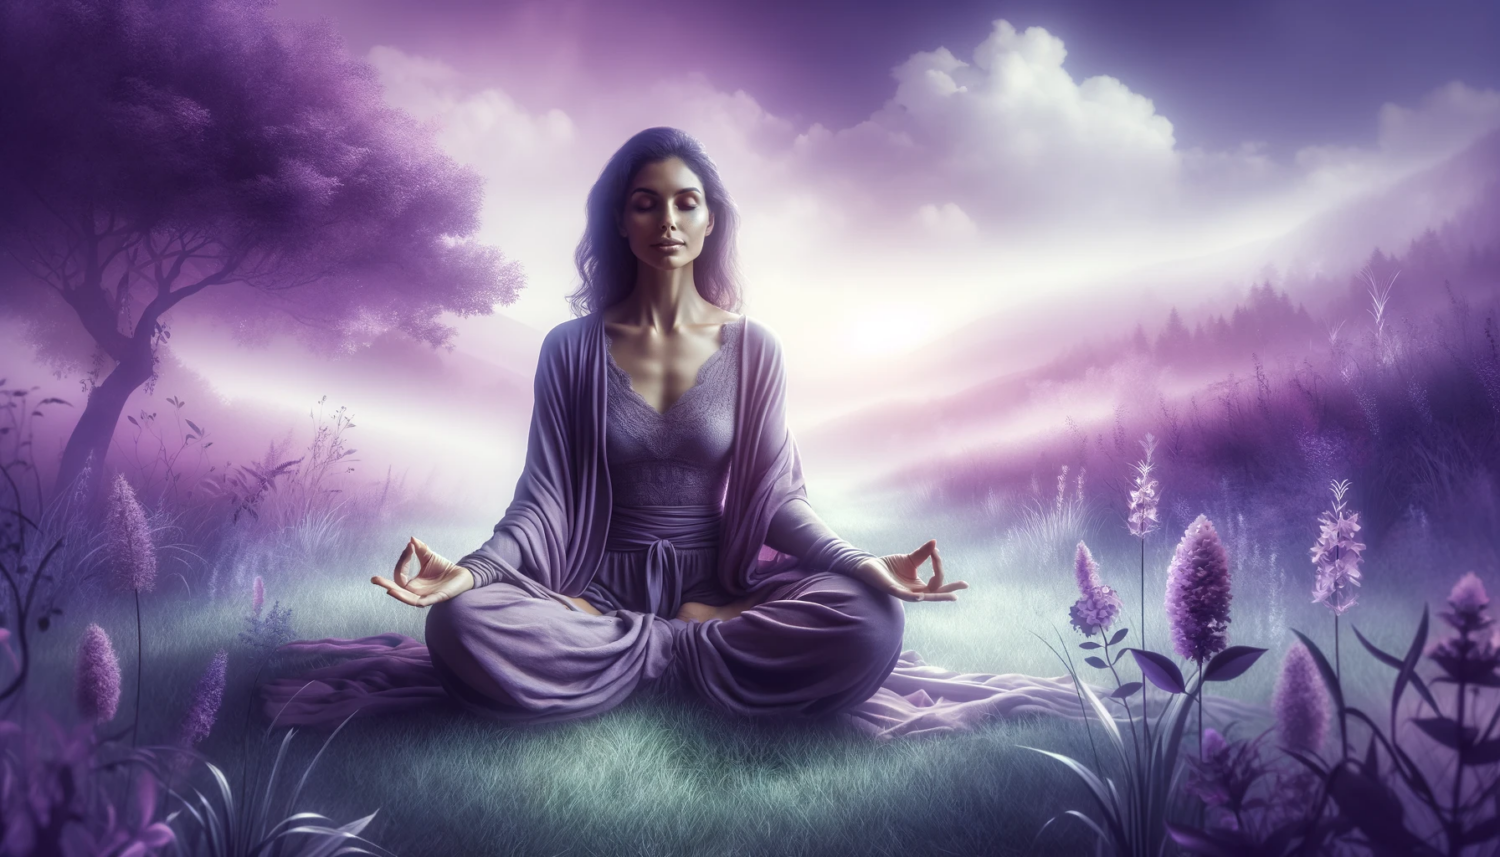 A banner-sized image of a woman meditating in a serene setting with a predominantly purple theme. The woman, of Middle-Eastern descent, is seated in a classic meditation pose on a lush, grassy meadow. Around her, the landscape transitions into a dreamy, purple-hued ambiance, symbolizing tranquility and spiritual depth. Soft, mystical light filters through, casting gentle shadows and highlighting her peaceful expression. She is dressed in comfortable, flowing garments that have shades of purple, complementing the overall theme. In the background, delicate purple flowers and ethereal, wispy clouds add to the serene and meditative atmosphere of the scene.